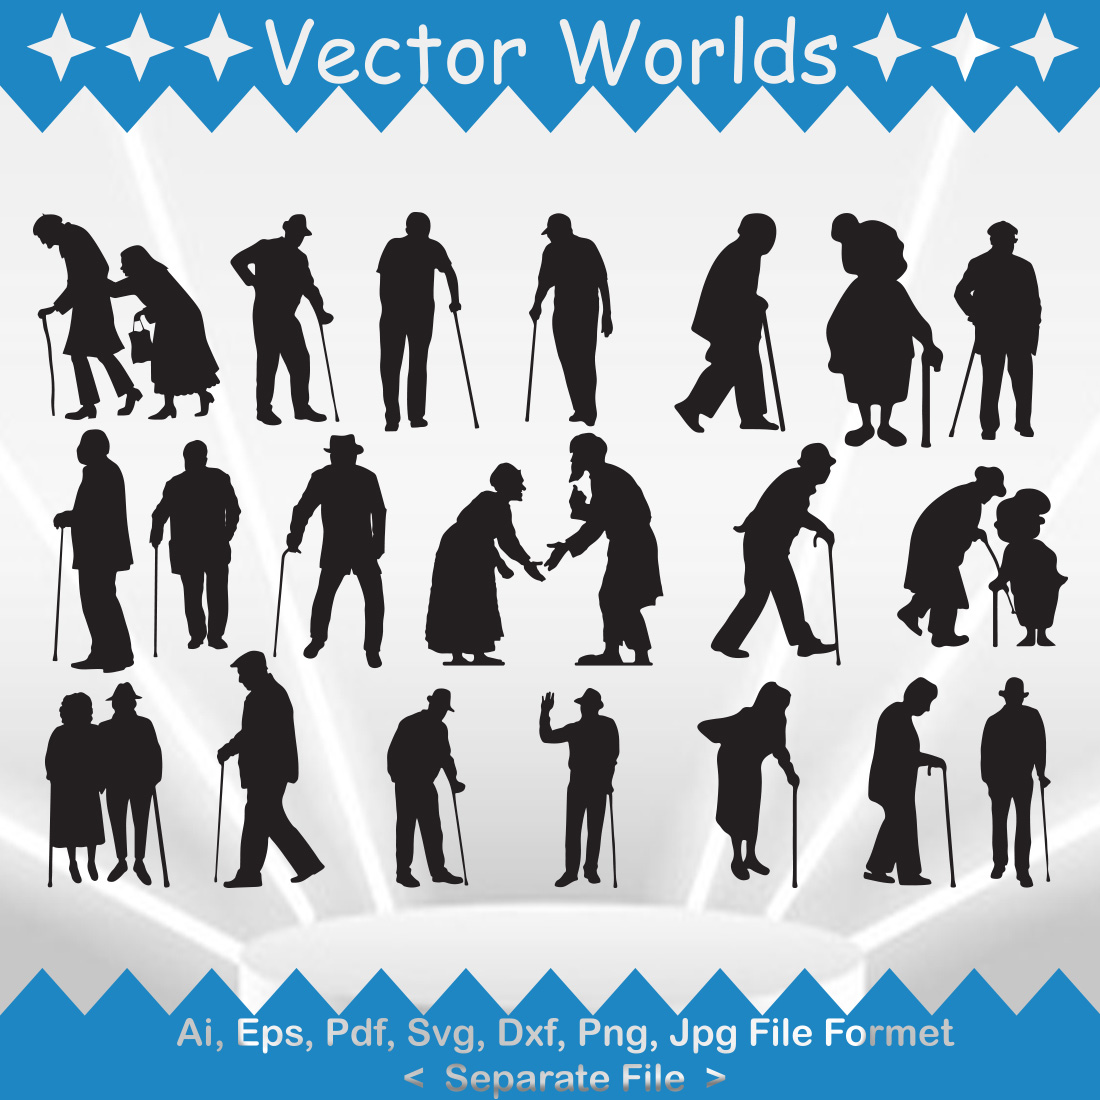 Old Man & Woman SVG Vector Design cover image.